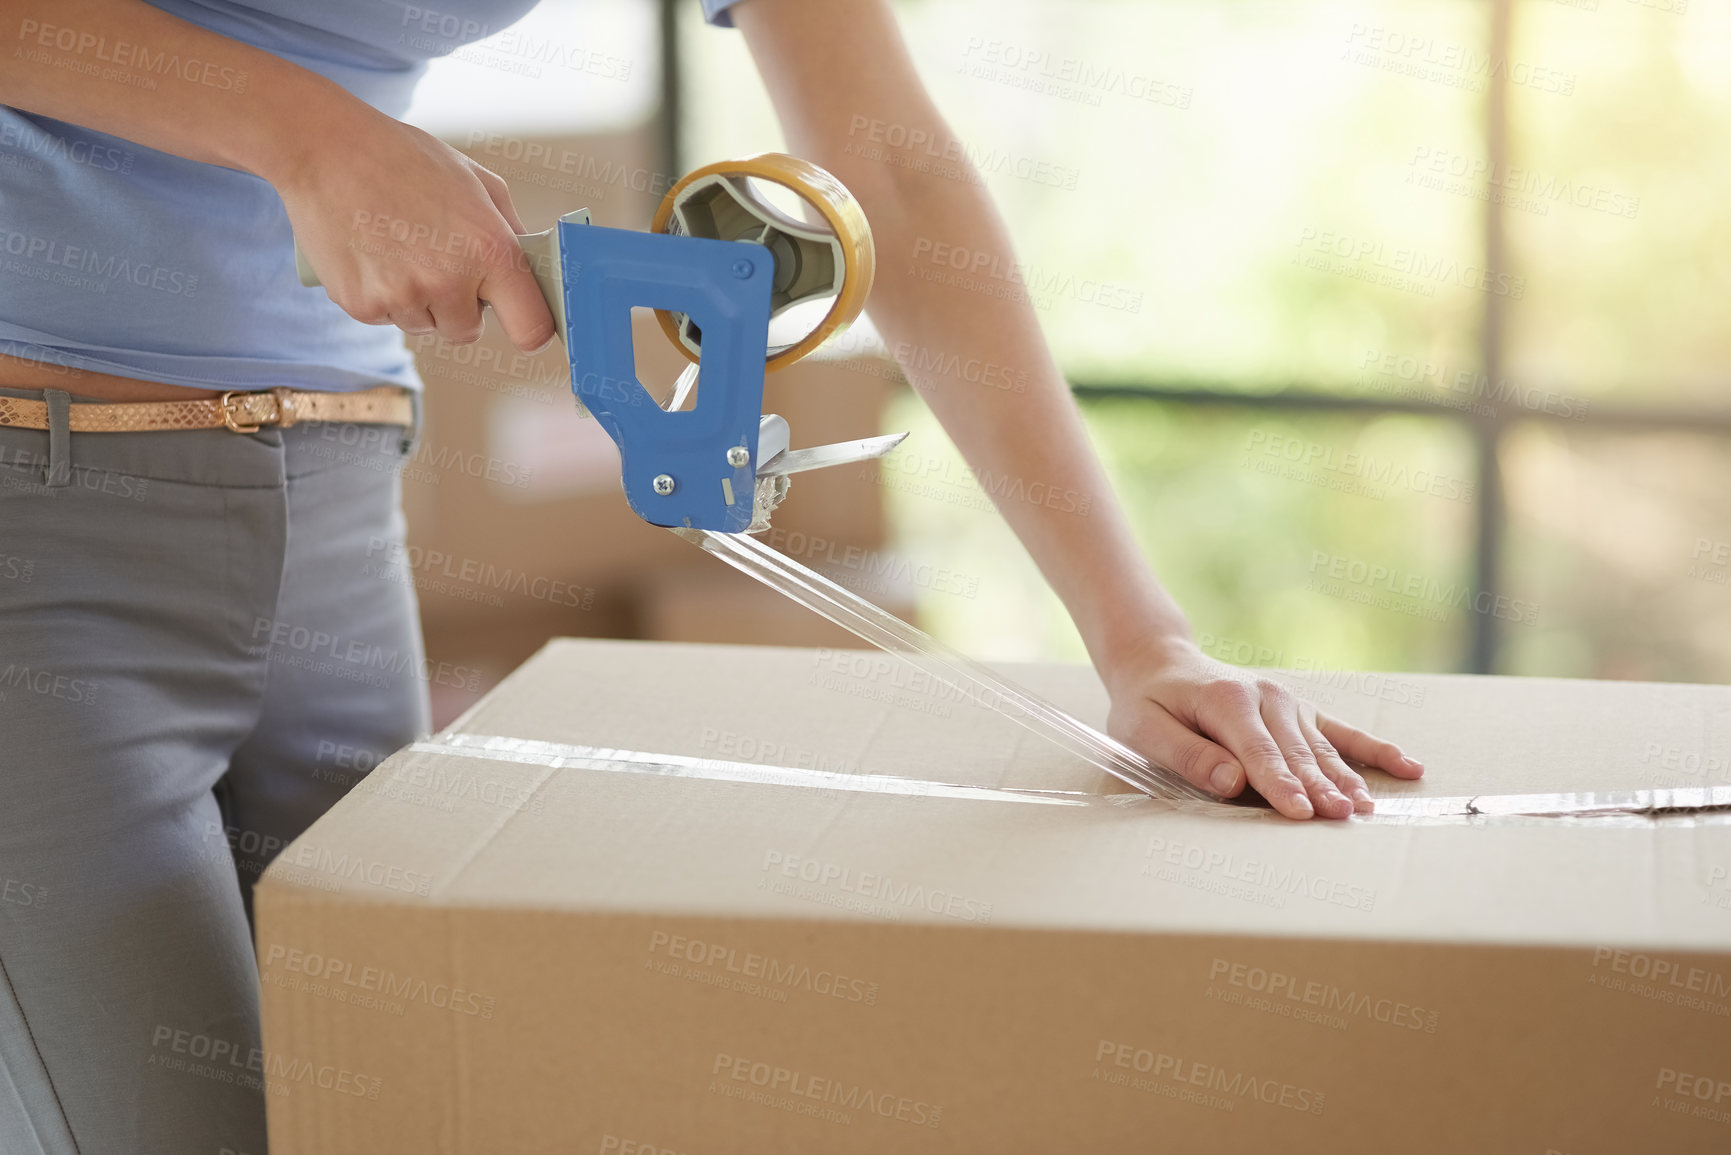 Buy stock photo Hands, tape and packaging box for moving, mortgage and property investment in new home. Real estate, cardboard and person seal with tools for cargo storage, packing or relocation to apartment house